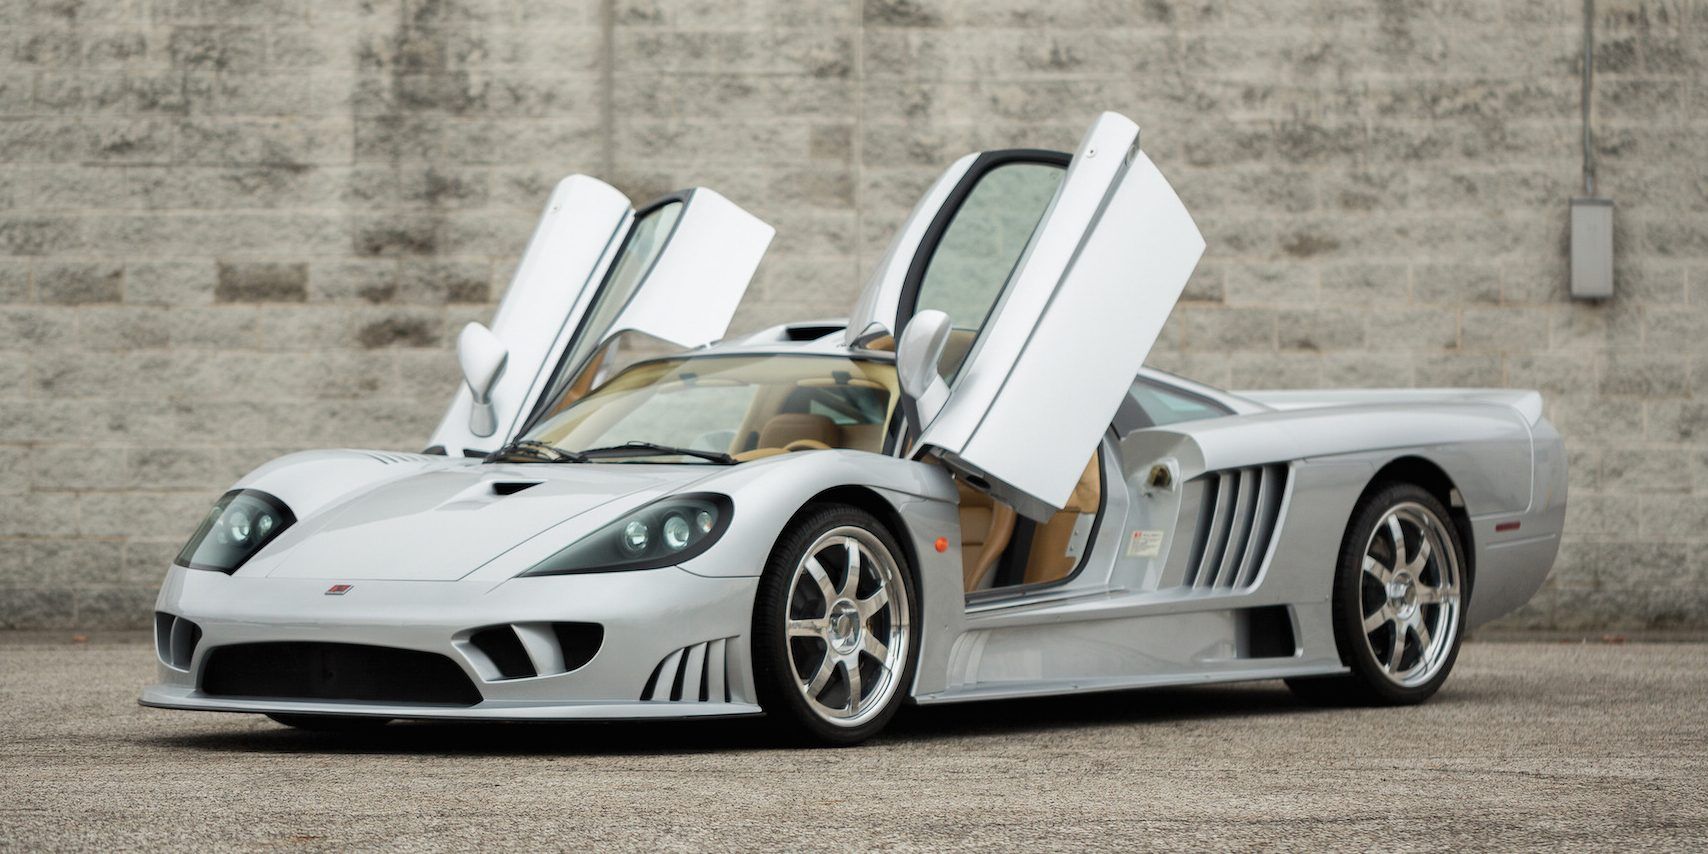 16 American Sports Cars That Go 0-60 MPH In Under 3 Seconds